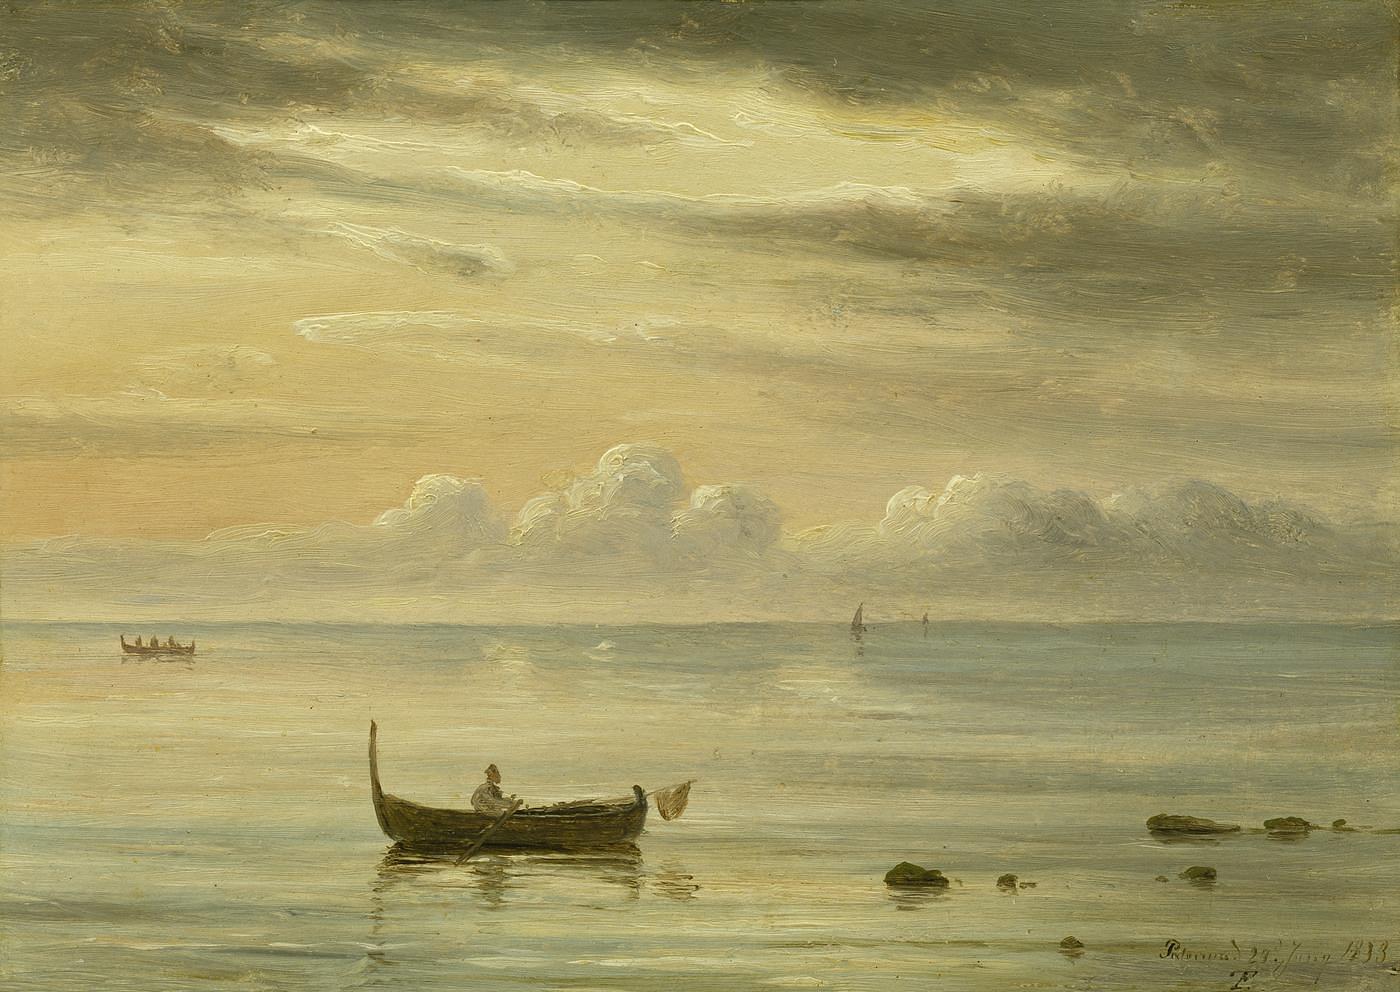 The Sea by Palermo, B191